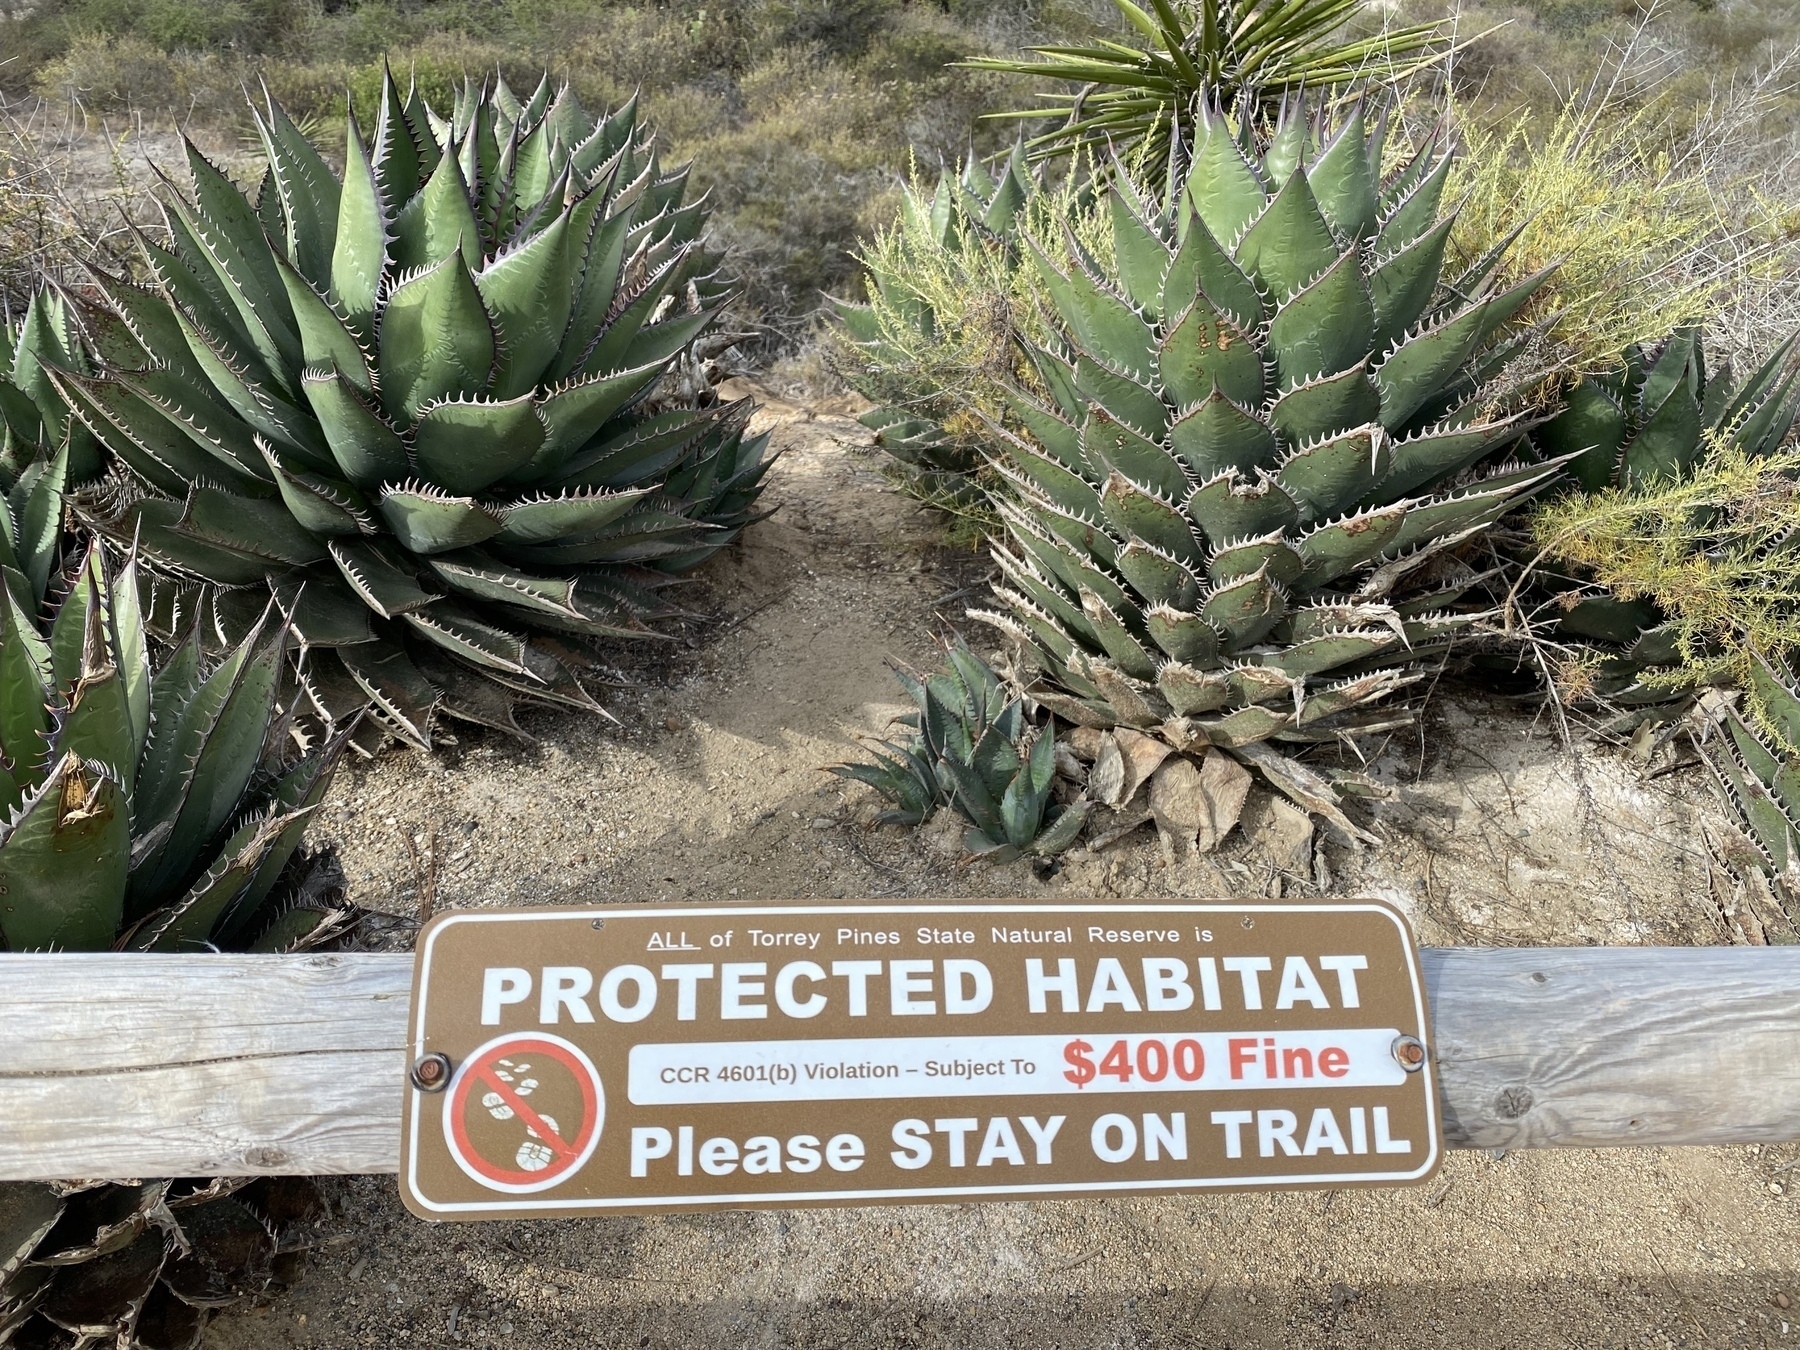 Two large succulents with a protected habitat sign in the foreground.